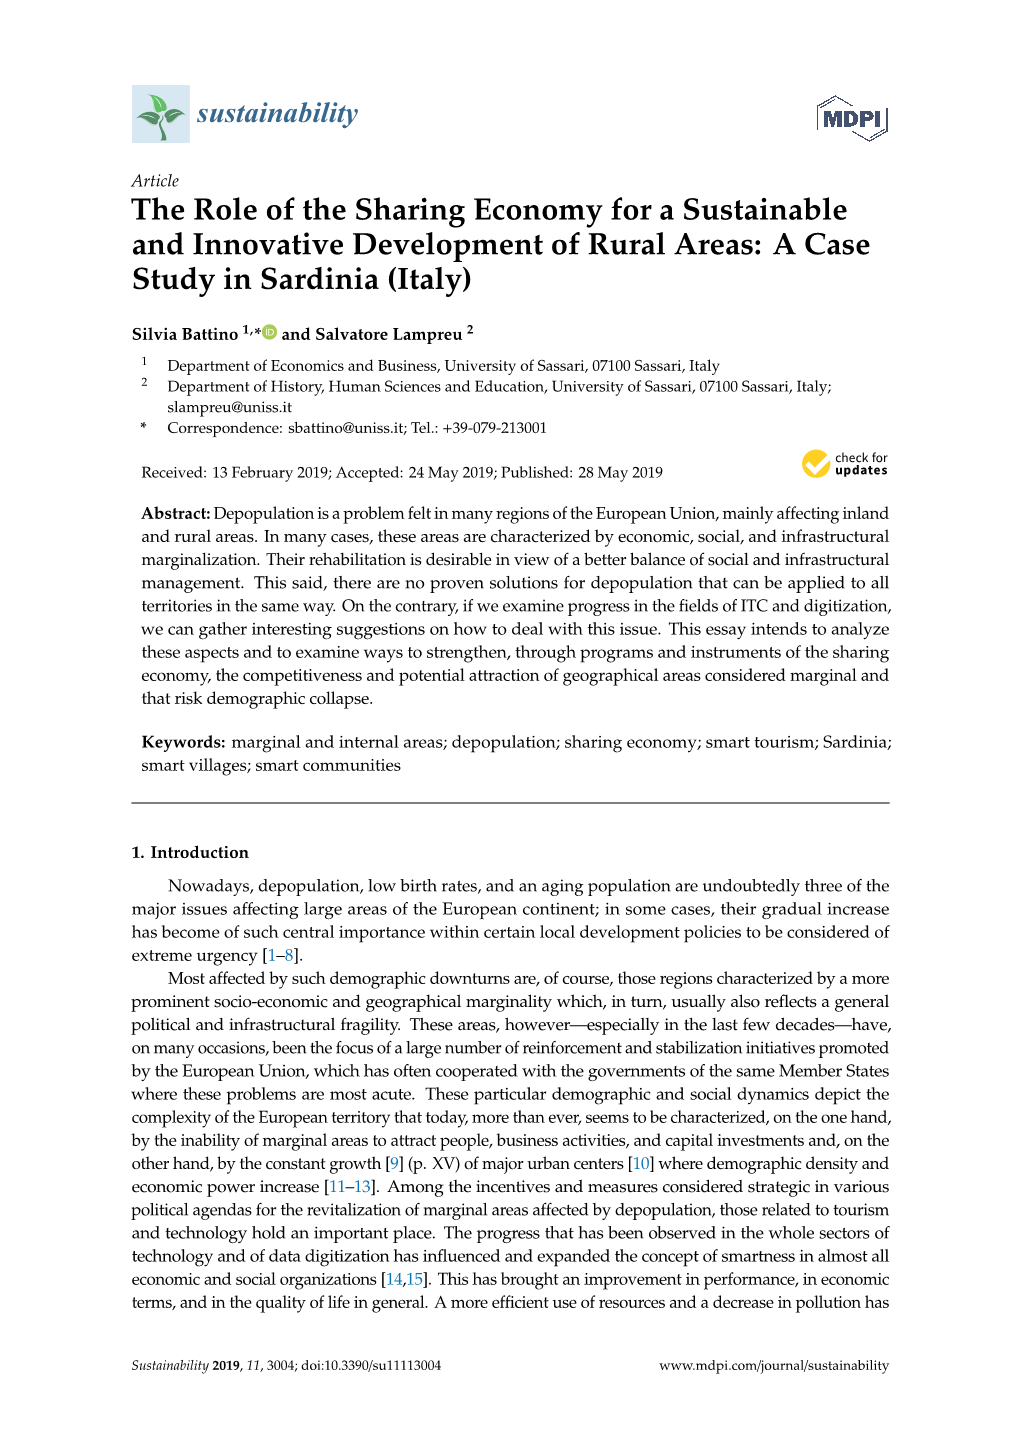 The Role of the Sharing Economy for a Sustainable and Innovative Development of Rural Areas: a Case Study in Sardinia (Italy)